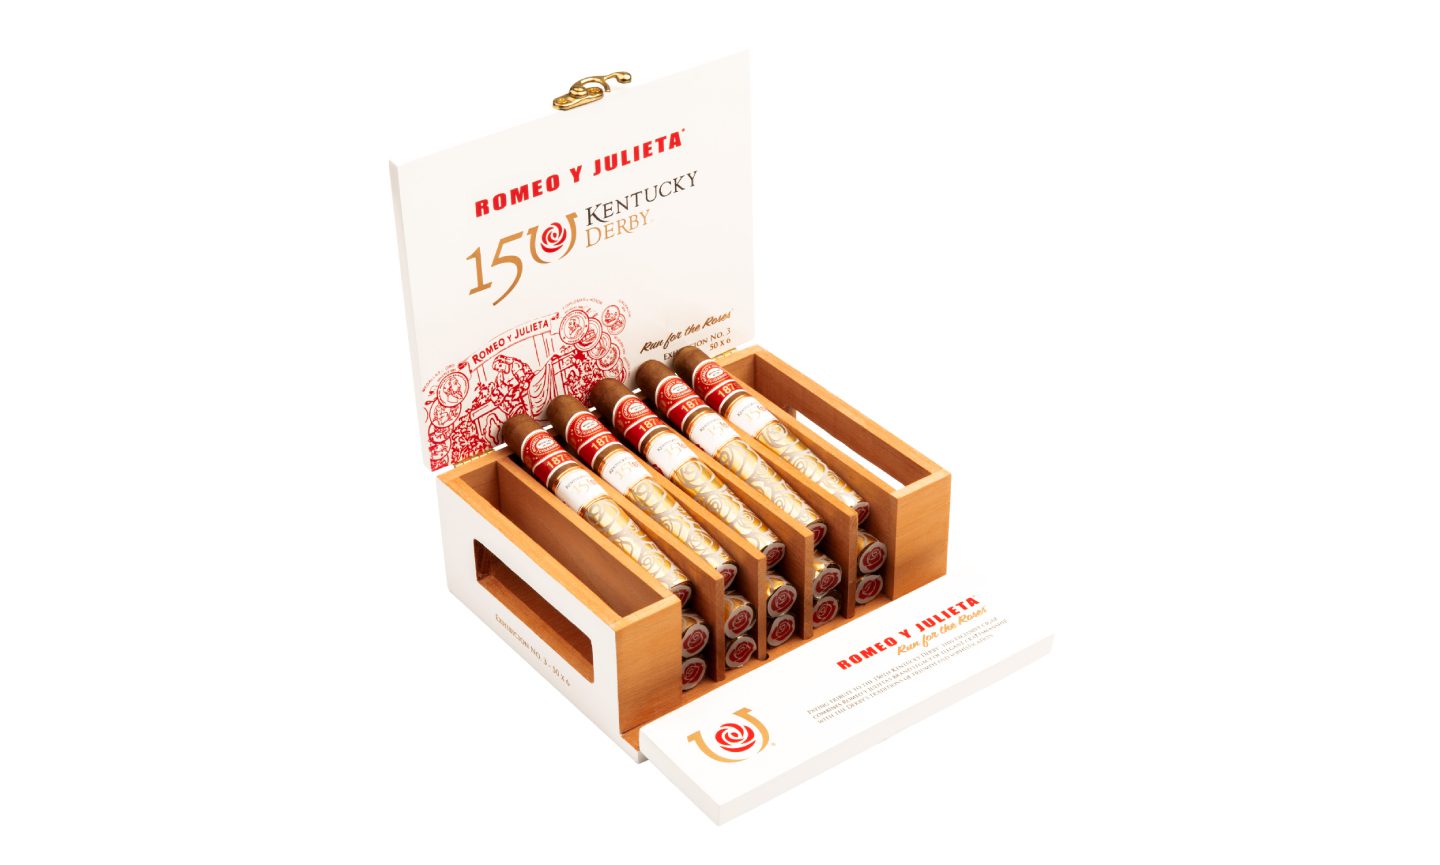 altadis-usa.-launches-romeo-y-julieta-1875-run-for-the-roses-to-celebrate-the-150th-kentucky-derby